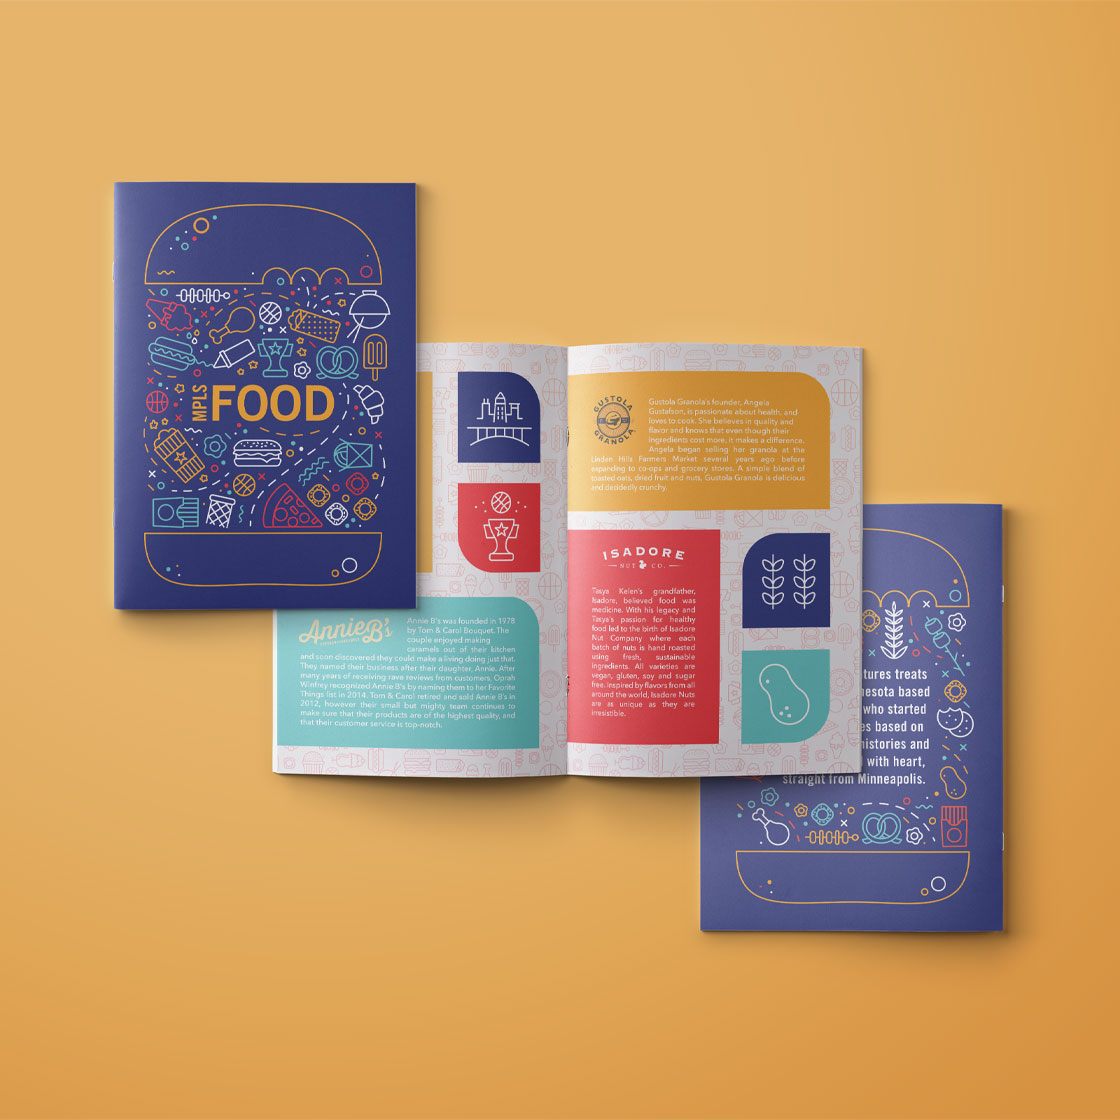 A mockup of a brochure about food